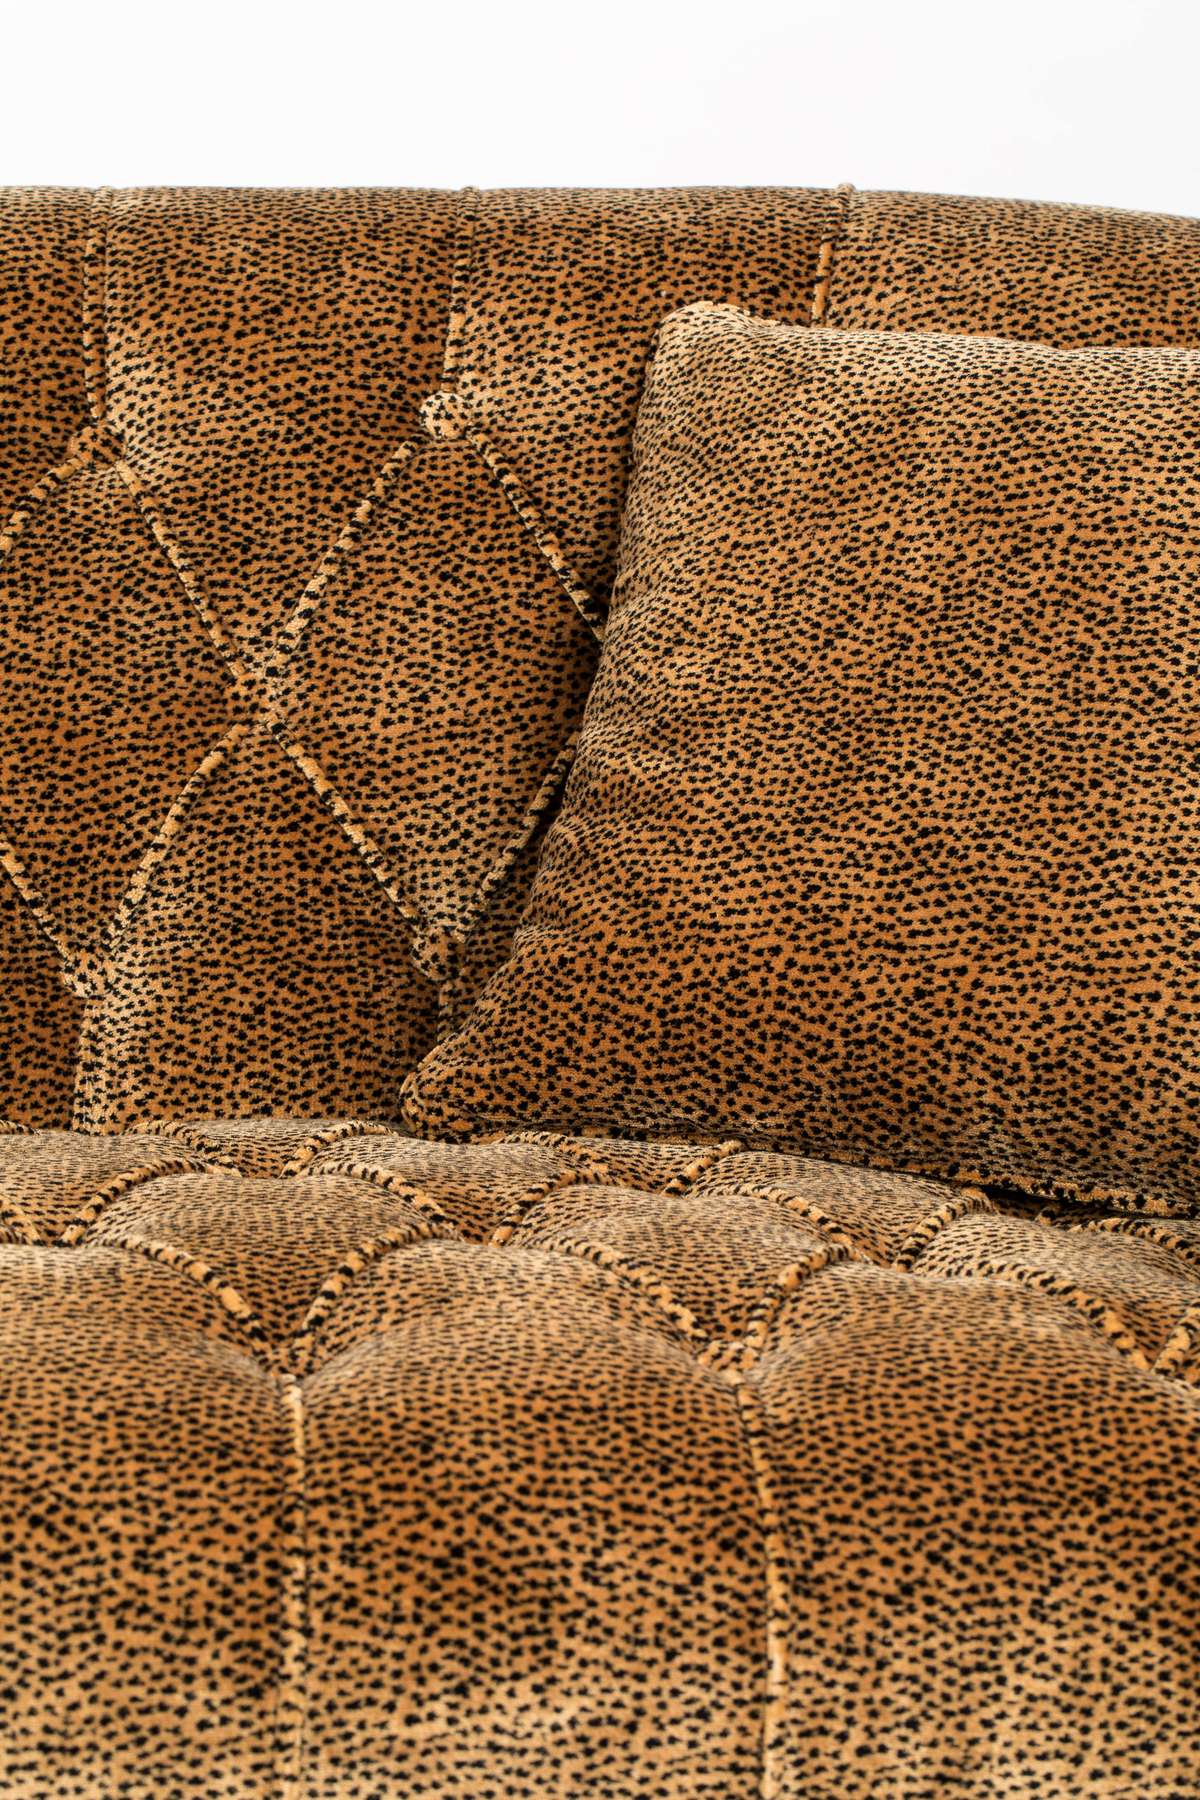 Our sofa bold monkey too pretty to sit on panther is nonsense. This velvet sofa in the color of flashy leopard spots also has a borders with studs. In other words? Sofa bold monkey too pretty to sit on the leopard looks fancy, but it is equally perfect for watching Netflix at night.